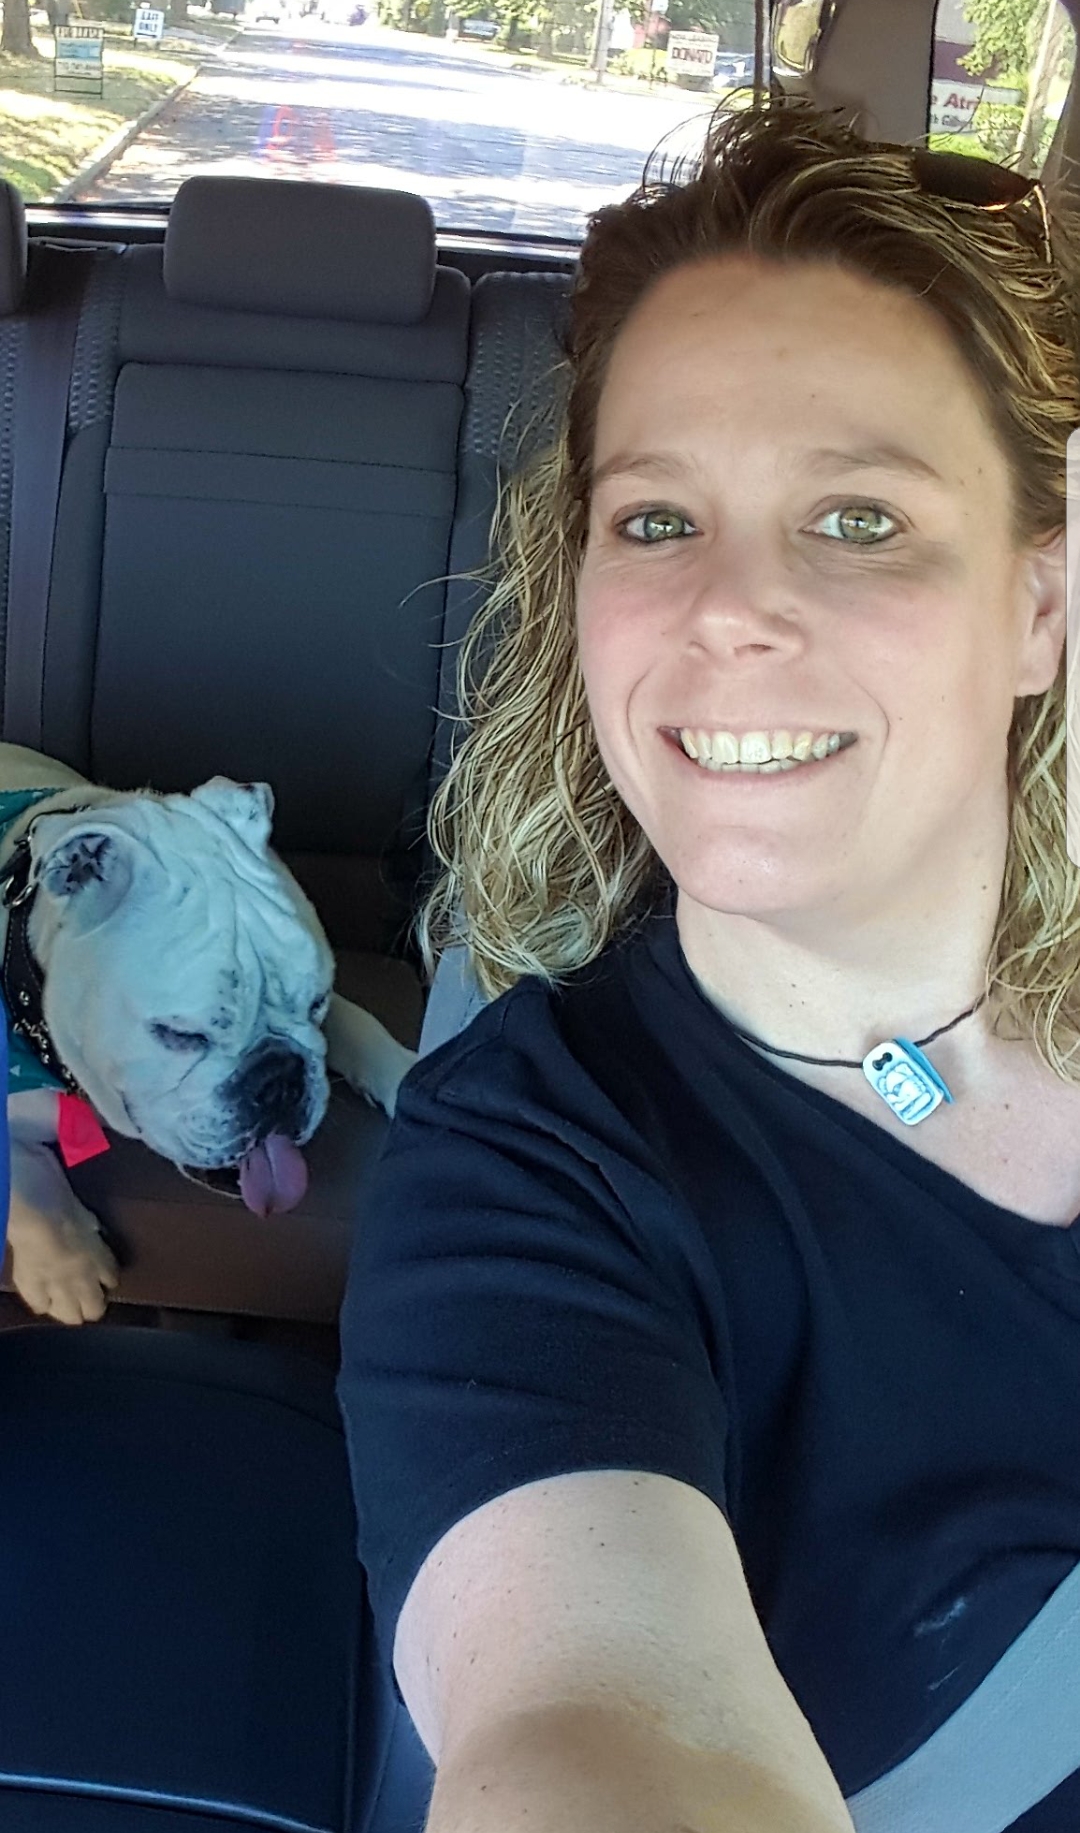 The writer and her dog in a car.